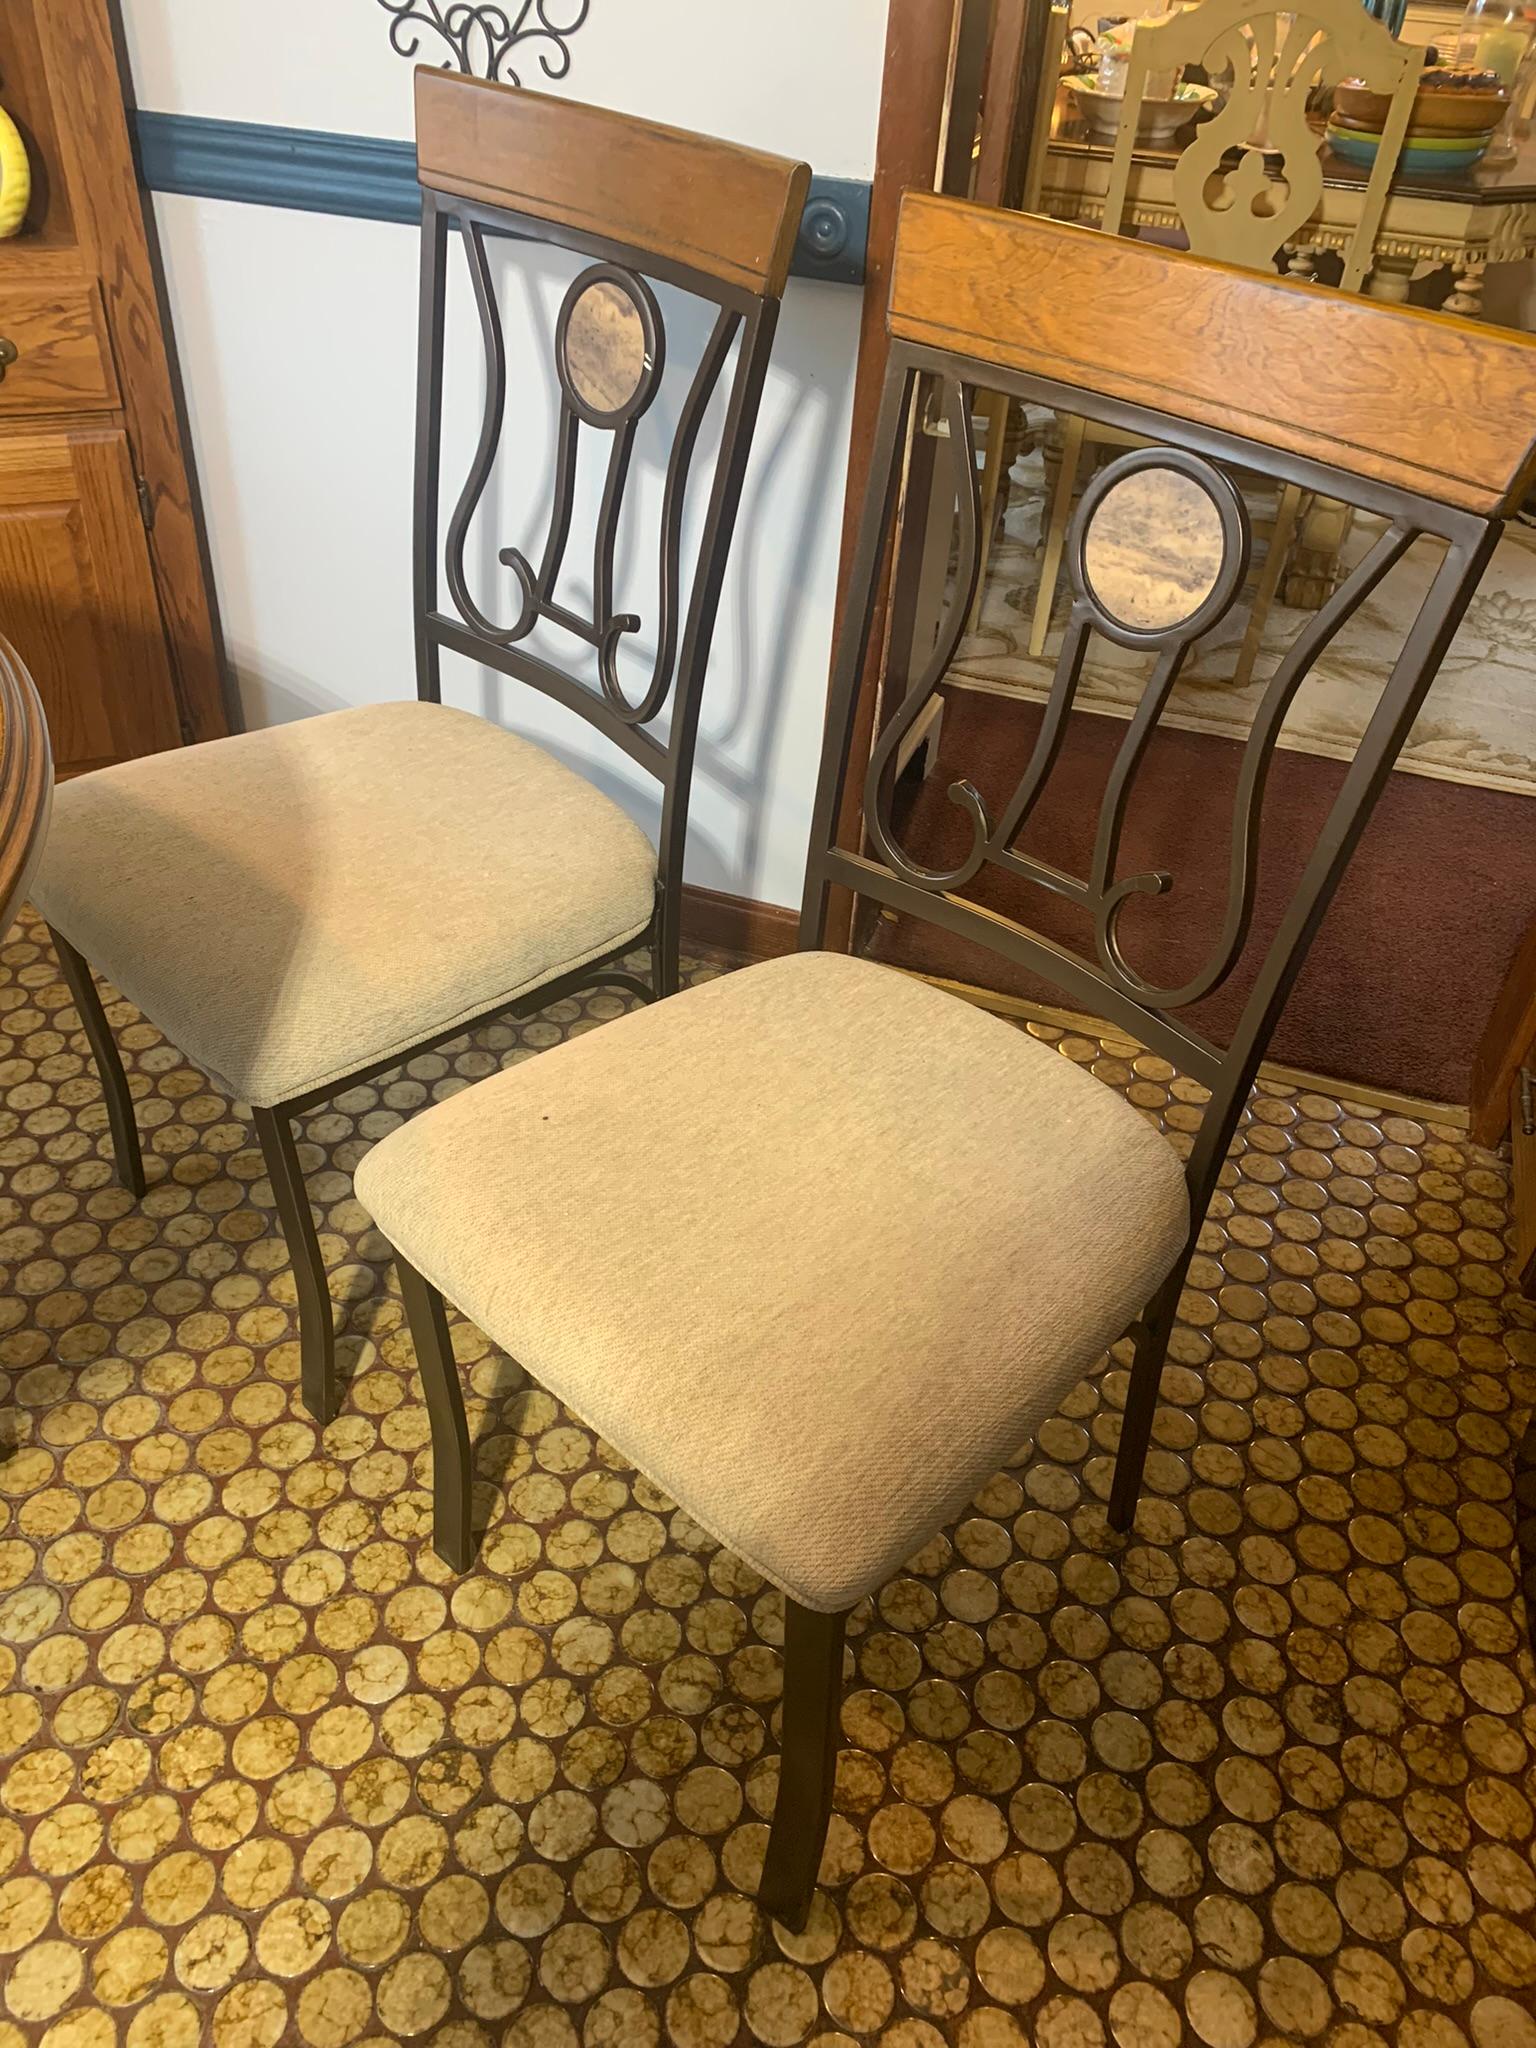 Faux Marble Top Table with 4 Chairs